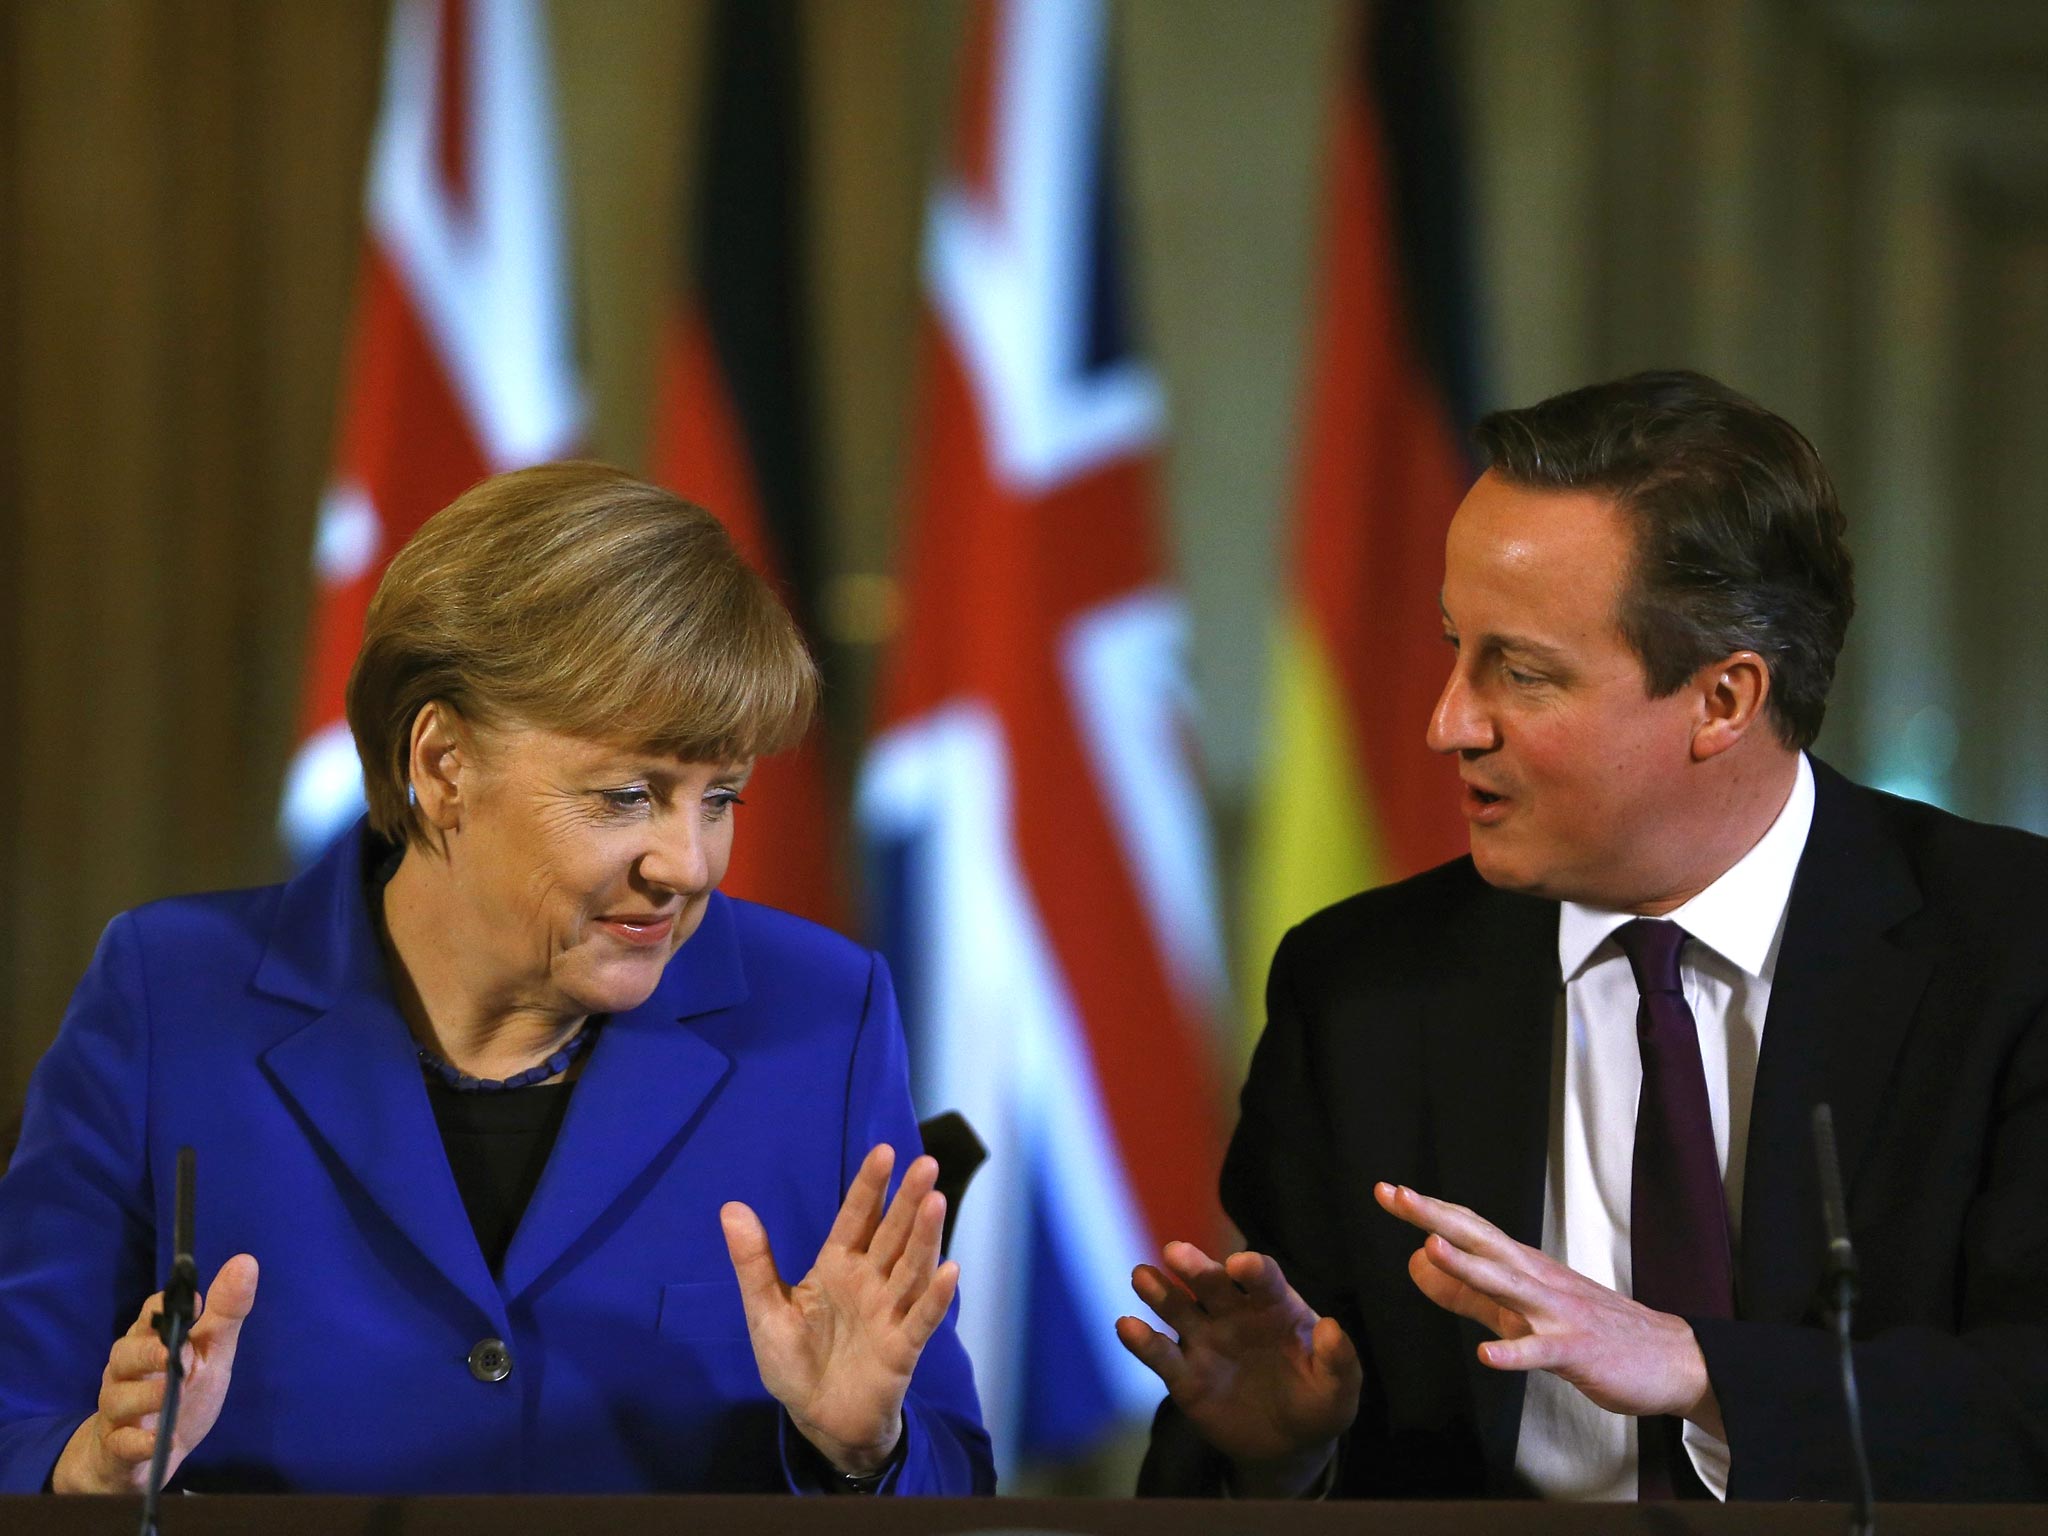 David Cameron speaks during a news conference with German Chancellor Angela Merkel at Downing Street